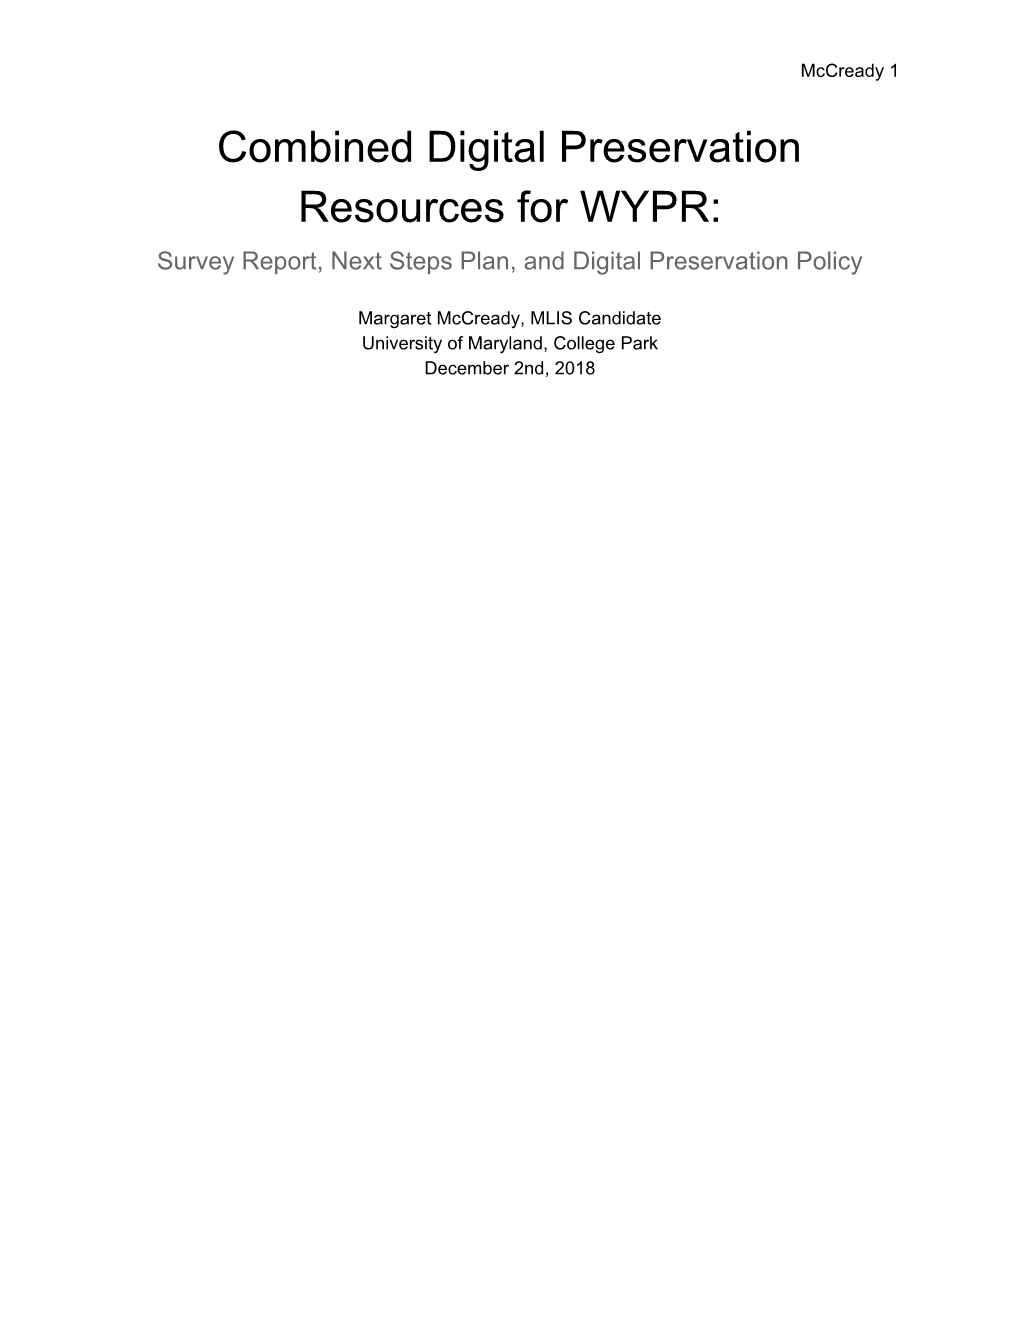 Combined Final WYPR Report and Policy